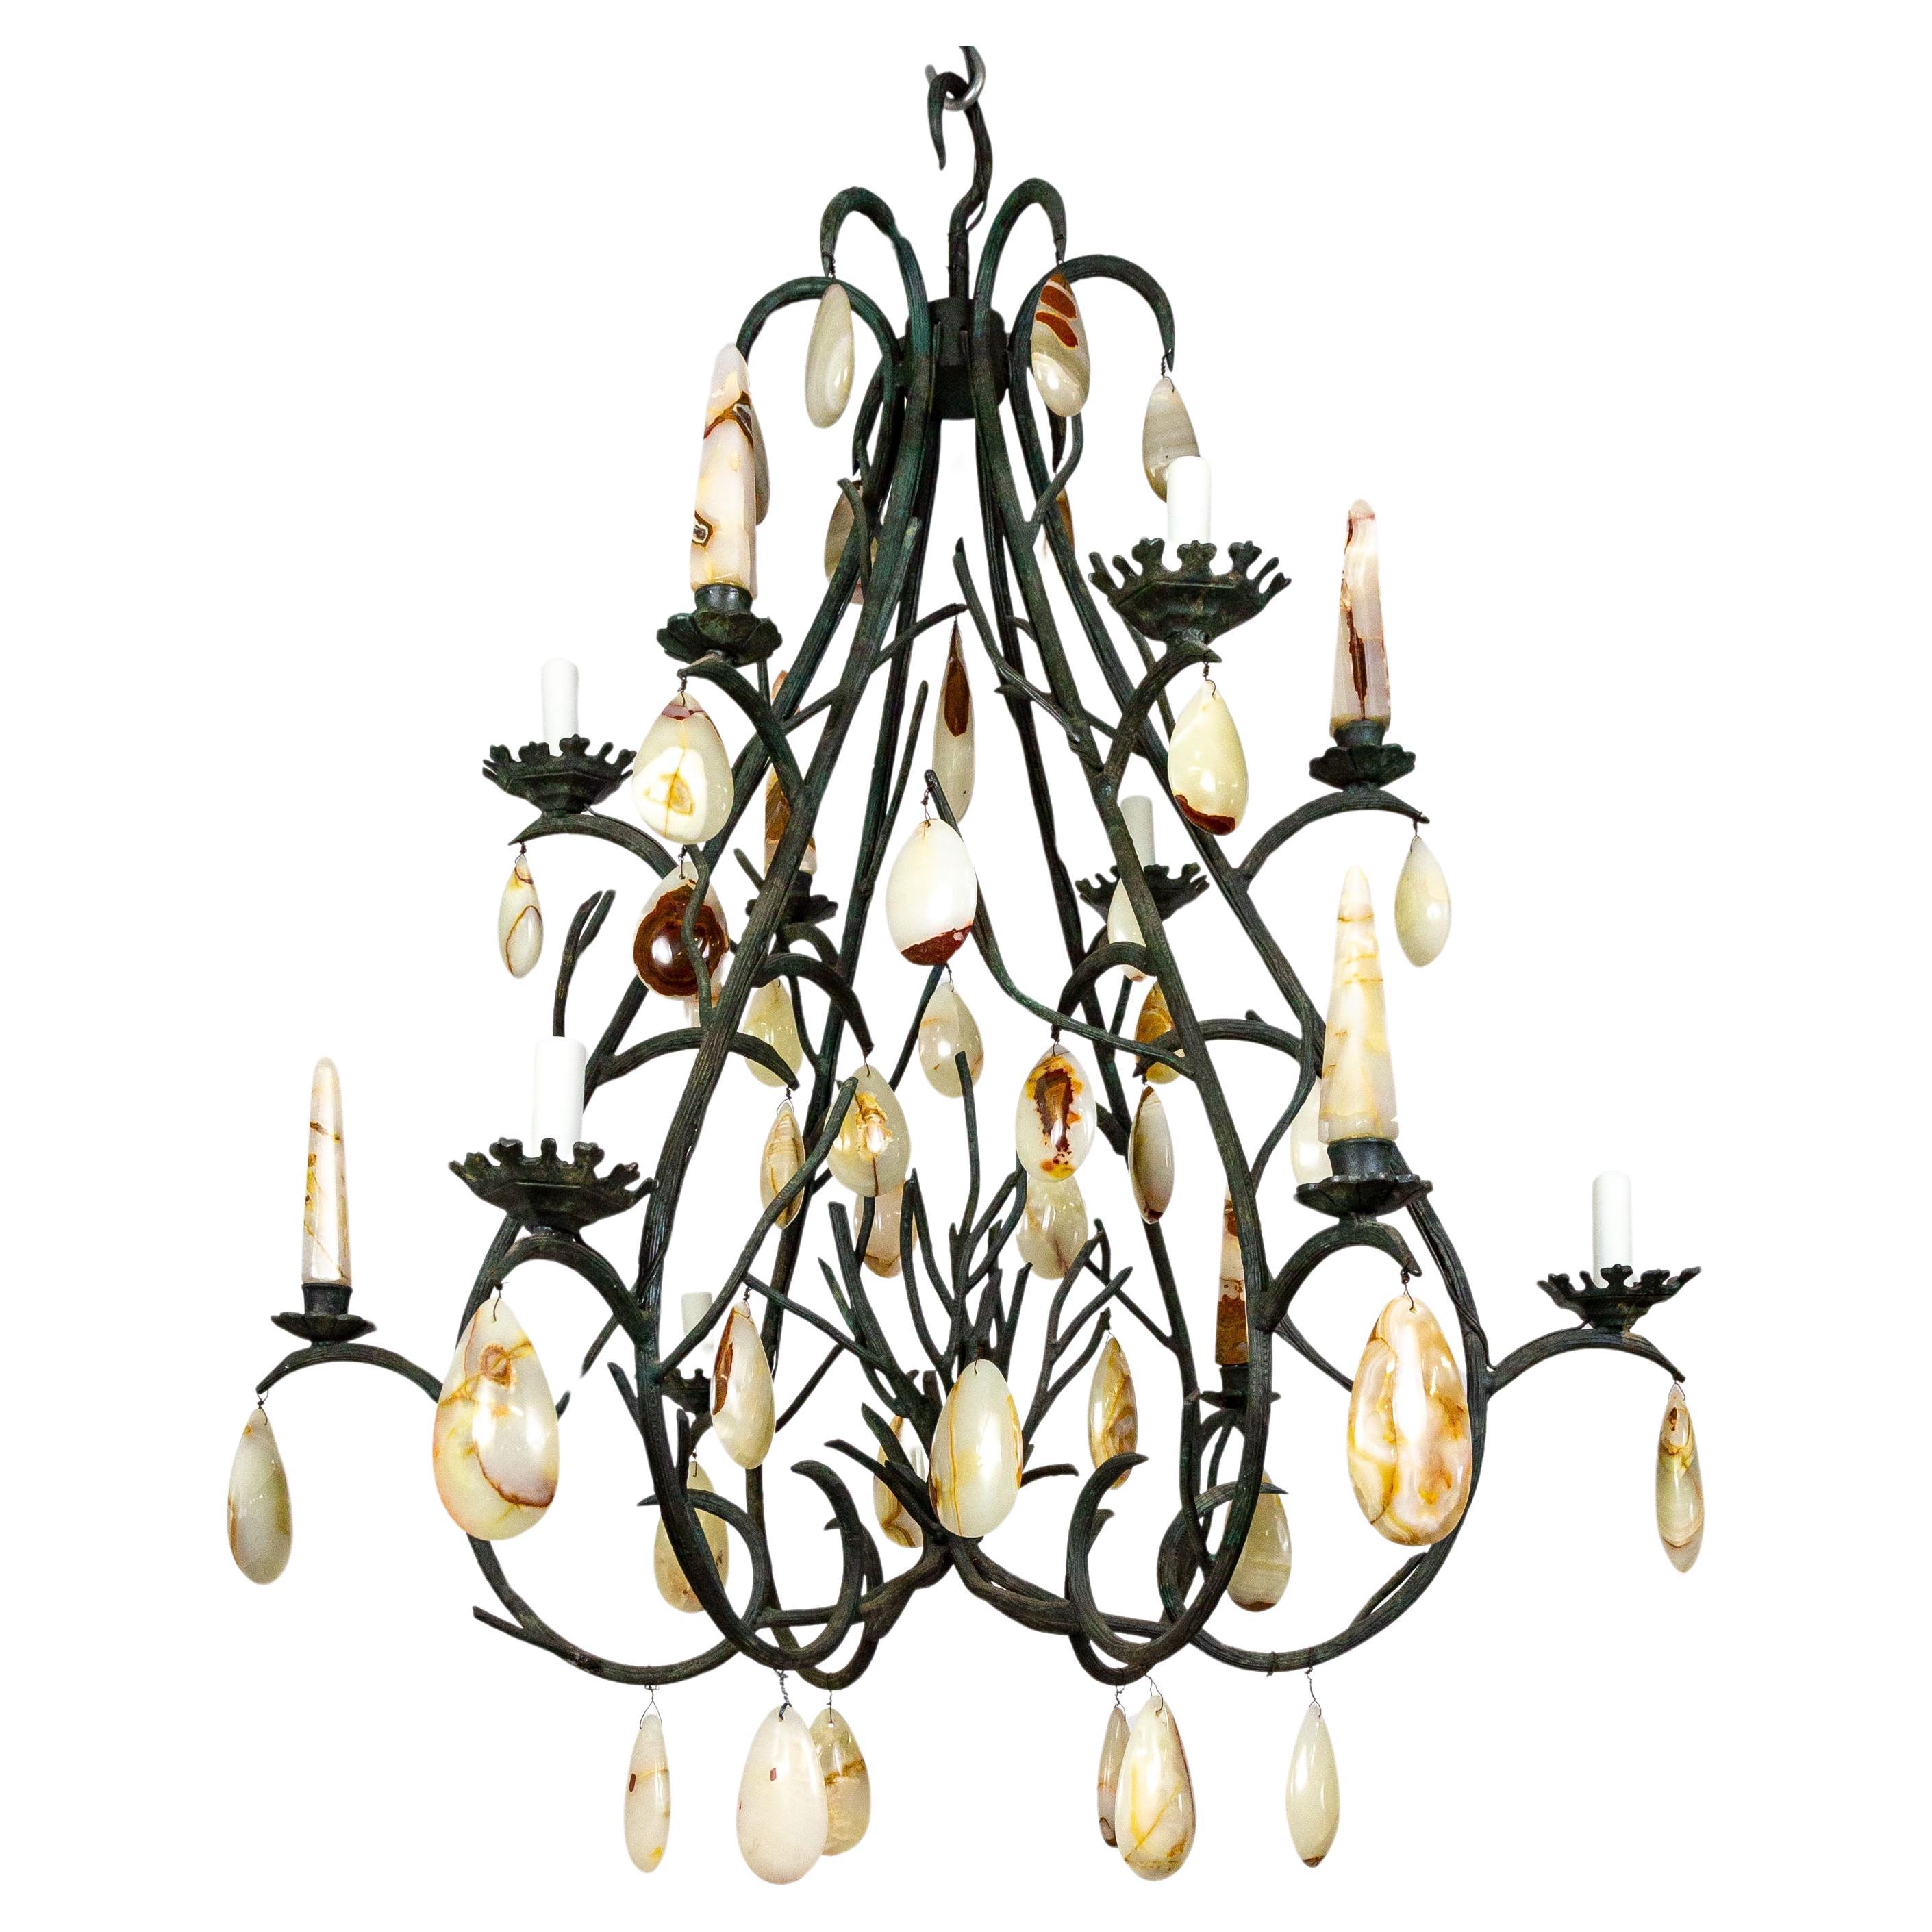 Giant Forest Green Branch Chandelier w/ Onyx Crystals by Luciano Tempo